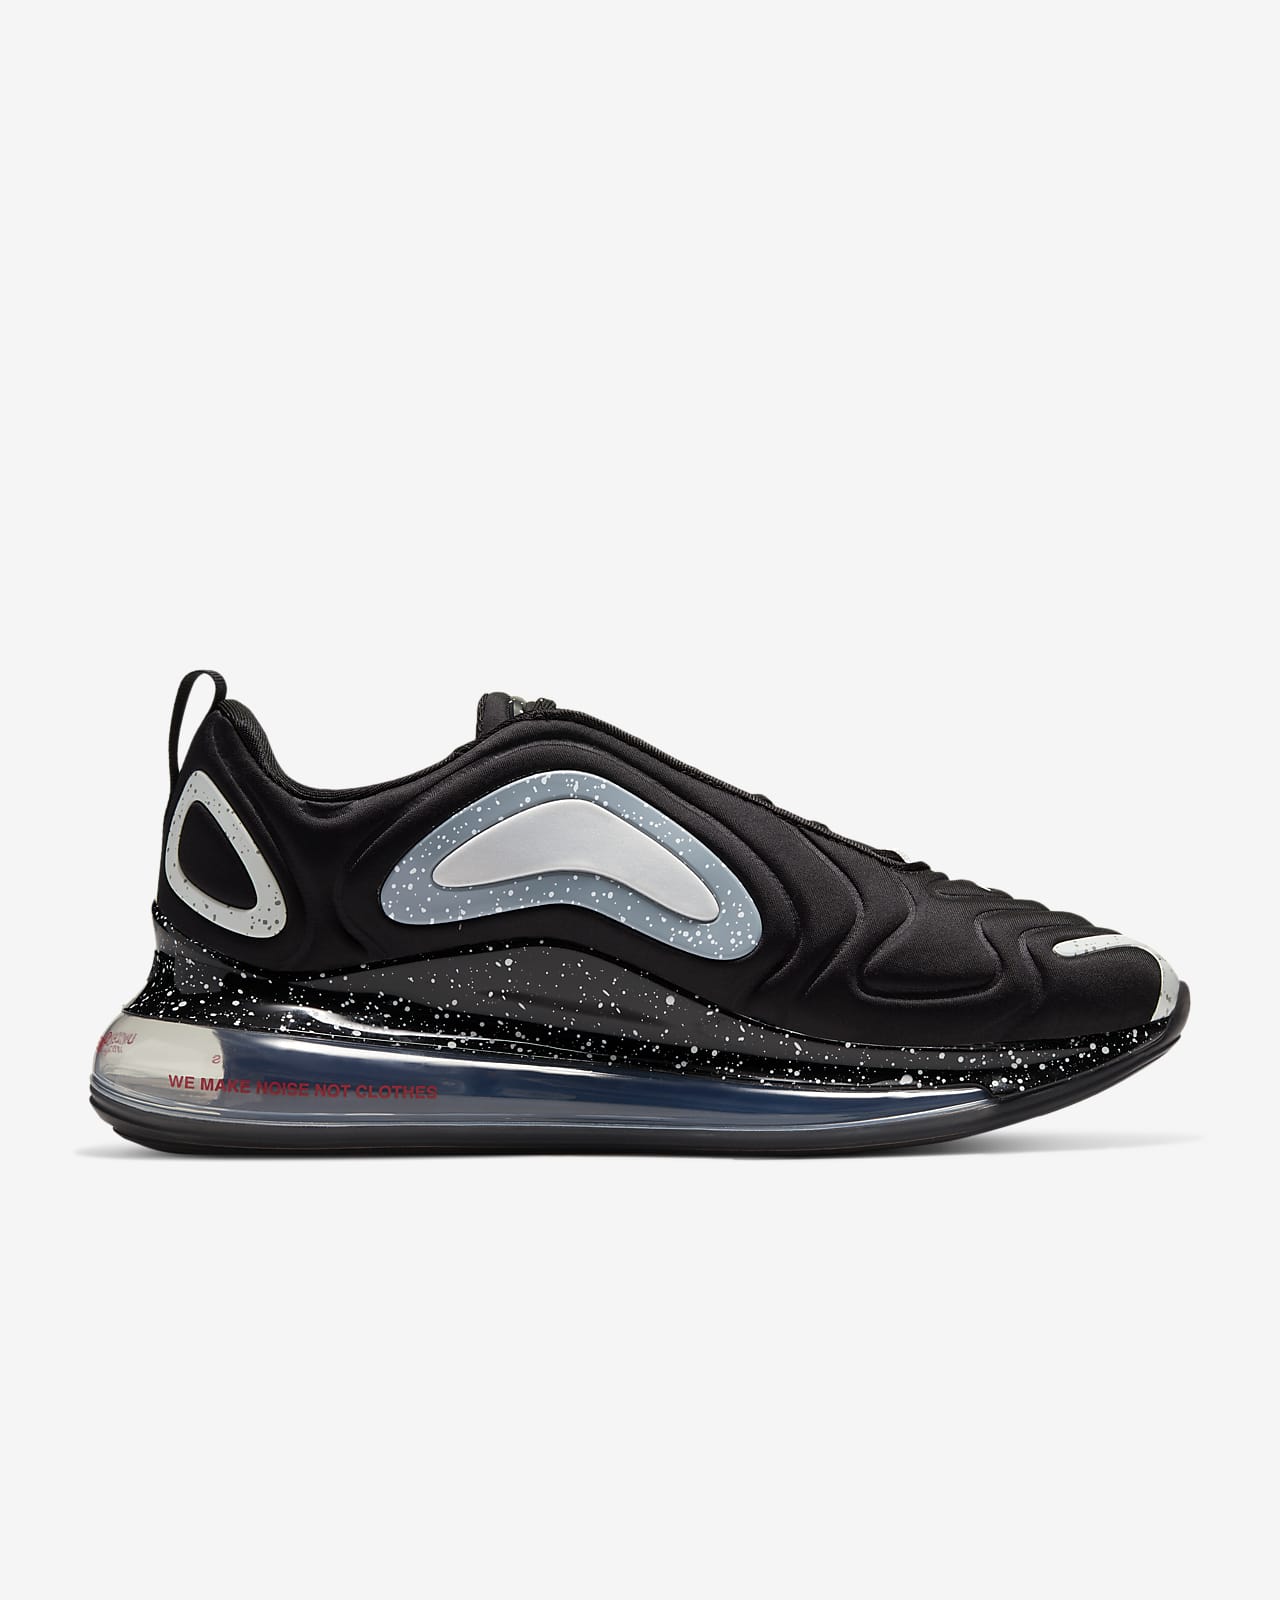 Nike x Undercover Air Max 720 Shoes. Nike JP